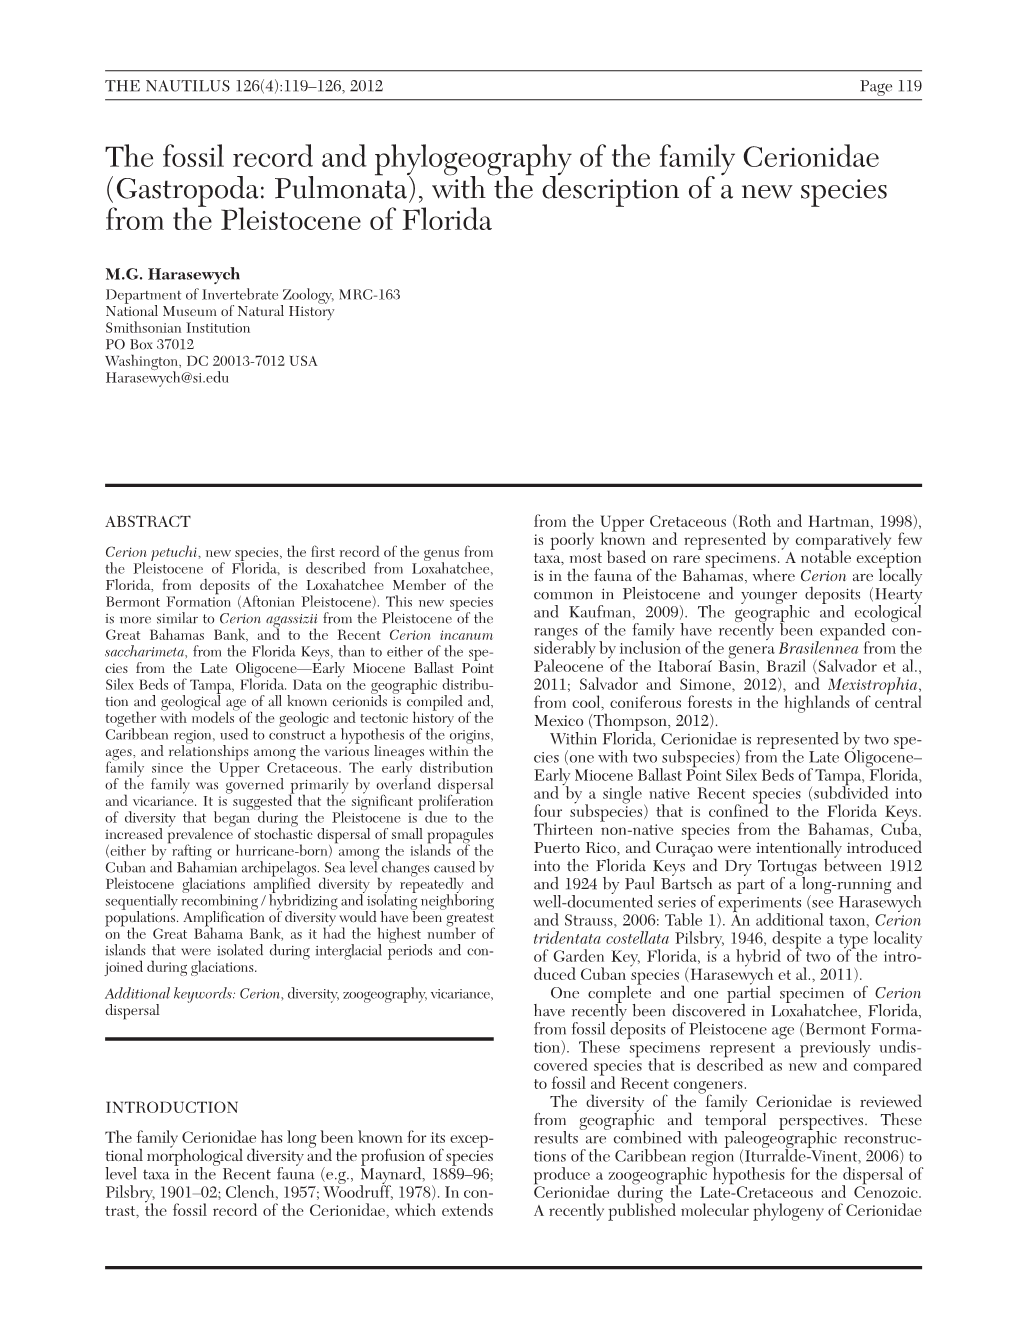 Gastropoda: Pulmonata), with the Description of a New Species from the Pleistocene of Florida